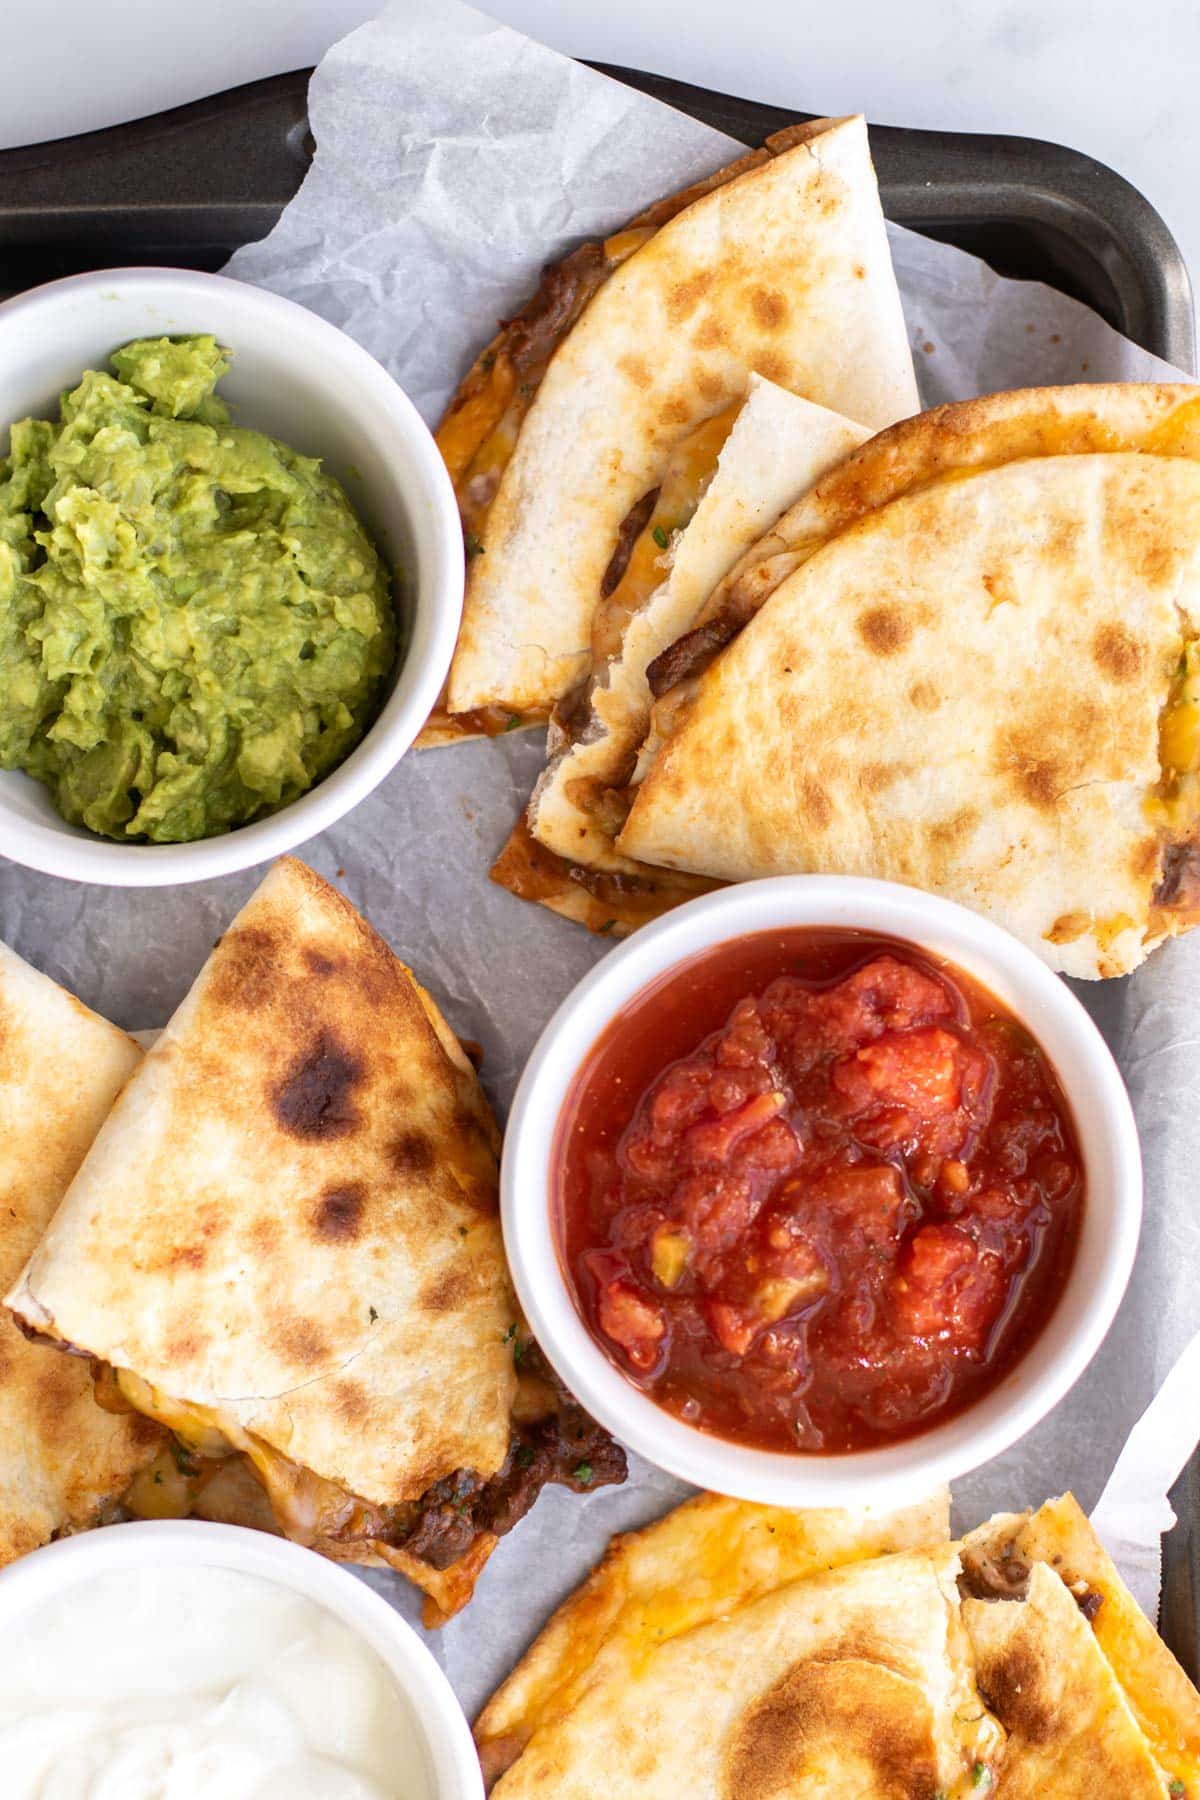 steak quesadillas with bowls of guacamole and salsa.